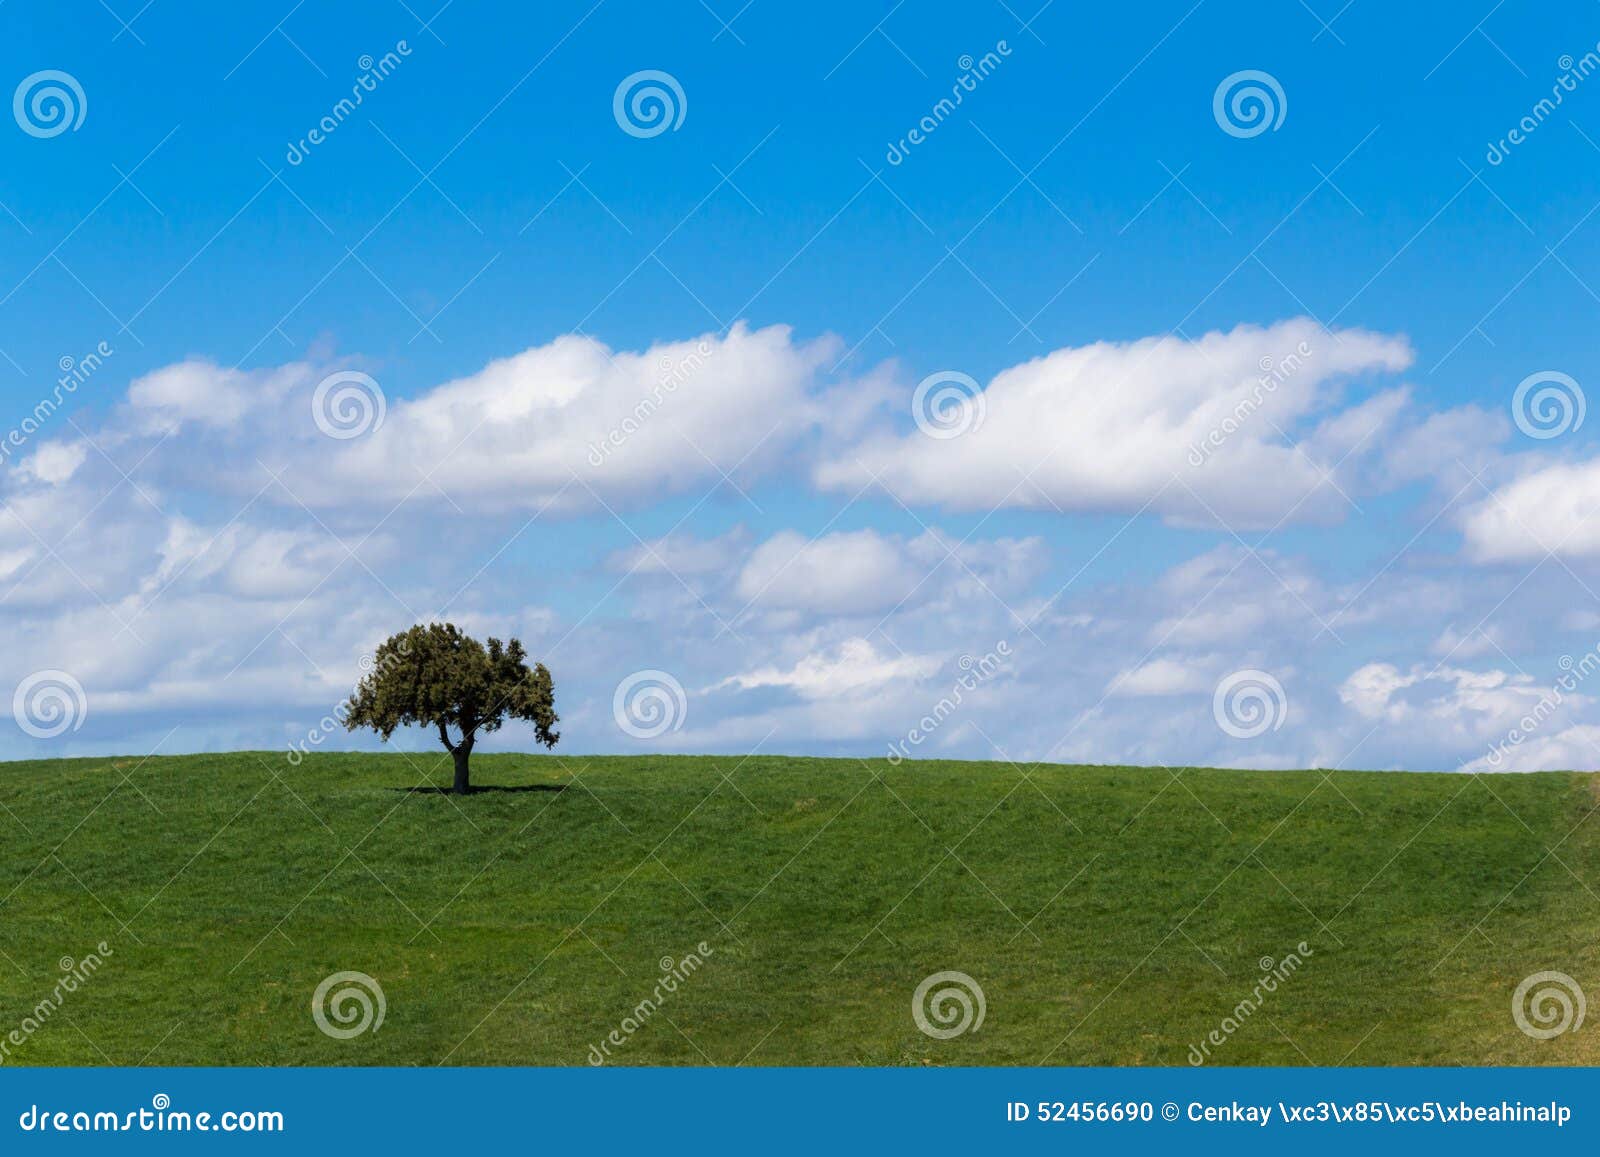 meadow, grass land with tree, blue sky, screen saver computer